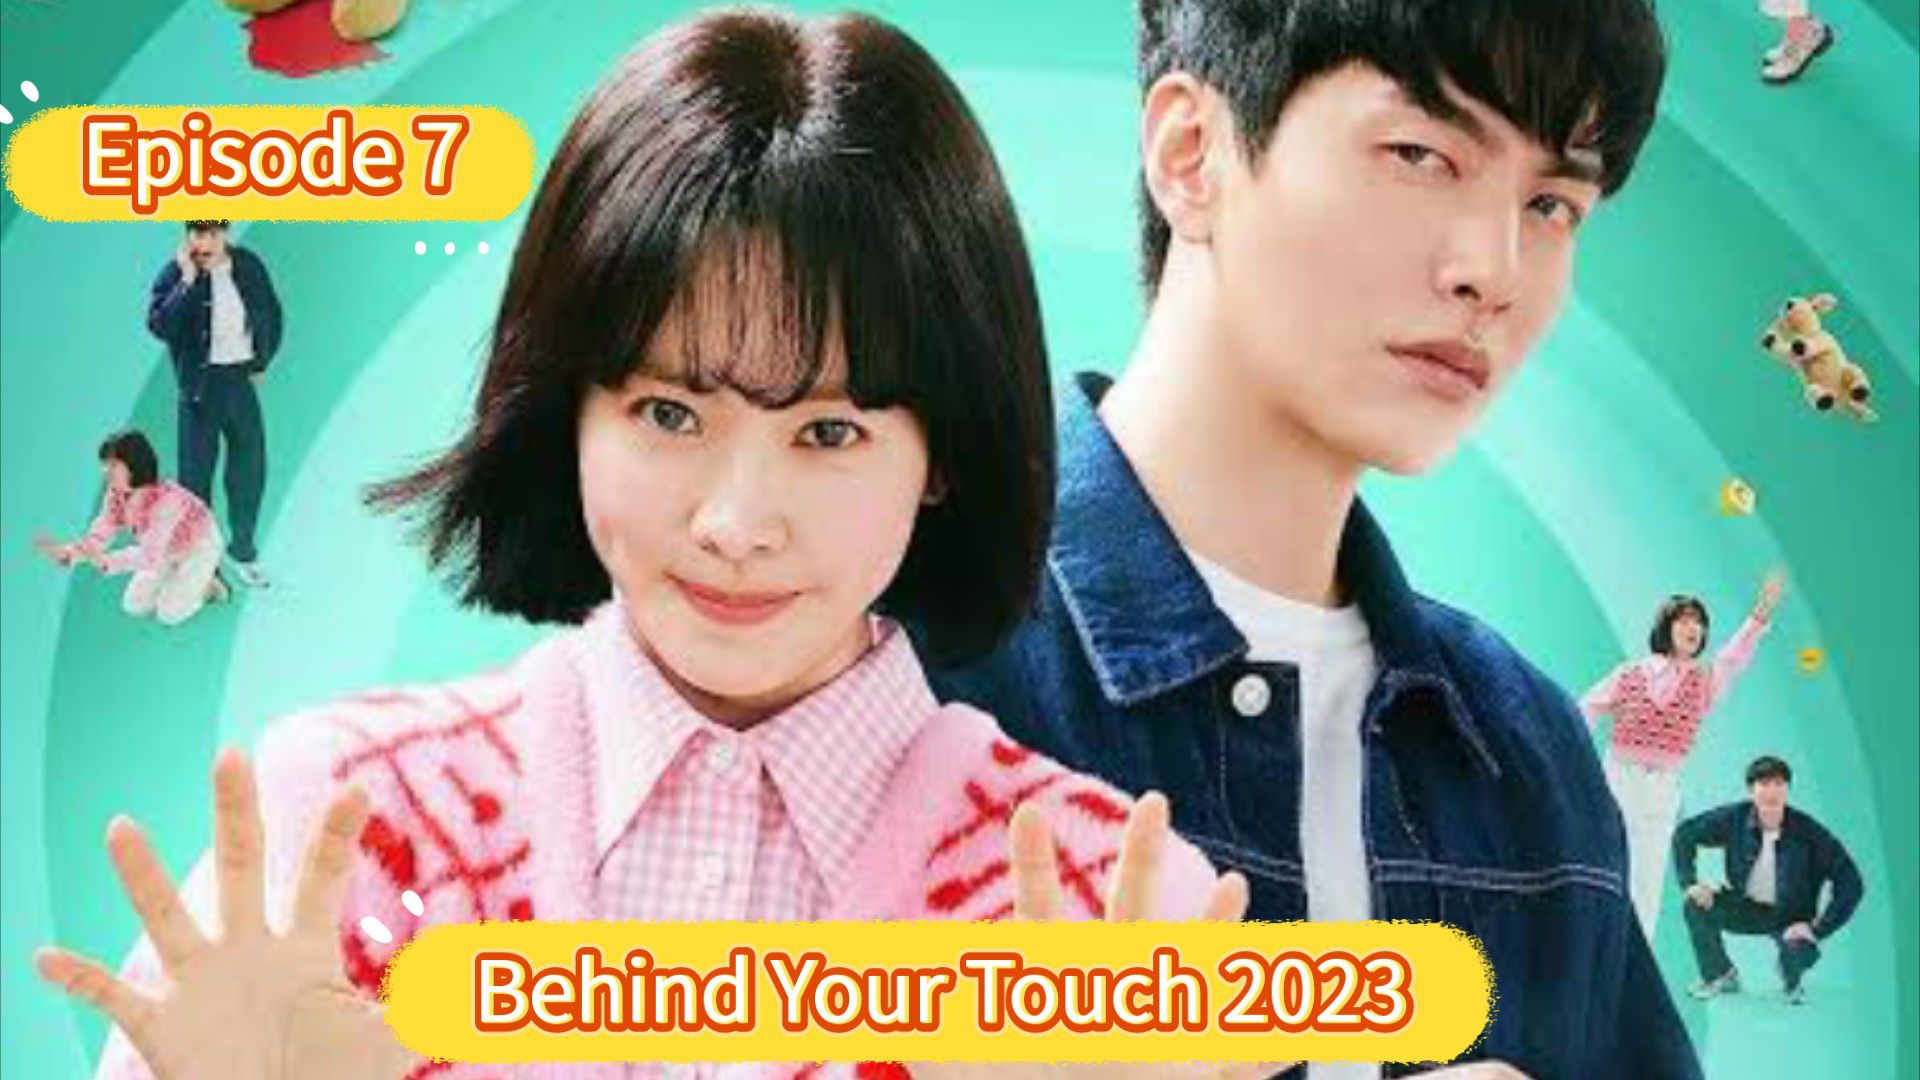 Ep.7 Behind your touch. #behindyourtouch #behindyourtouchkdrama #behin, Behind Your Touch